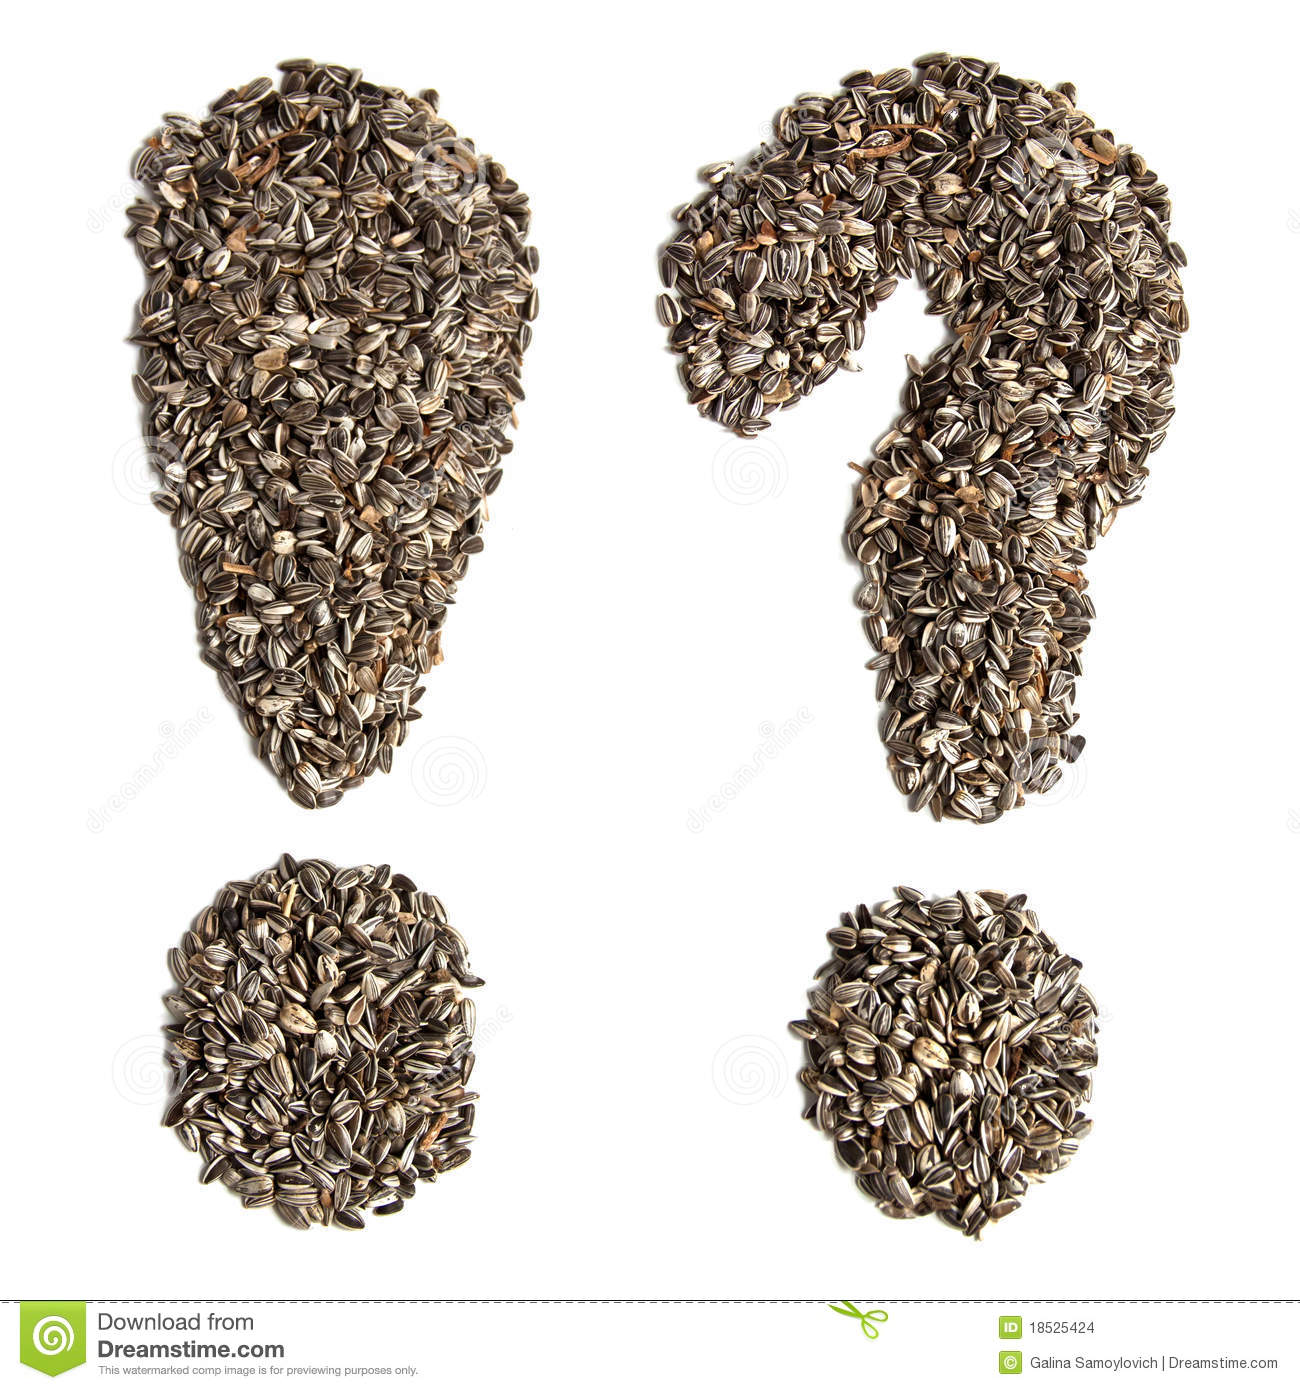 Sunflower Seeds Stock Images   Image  18525424